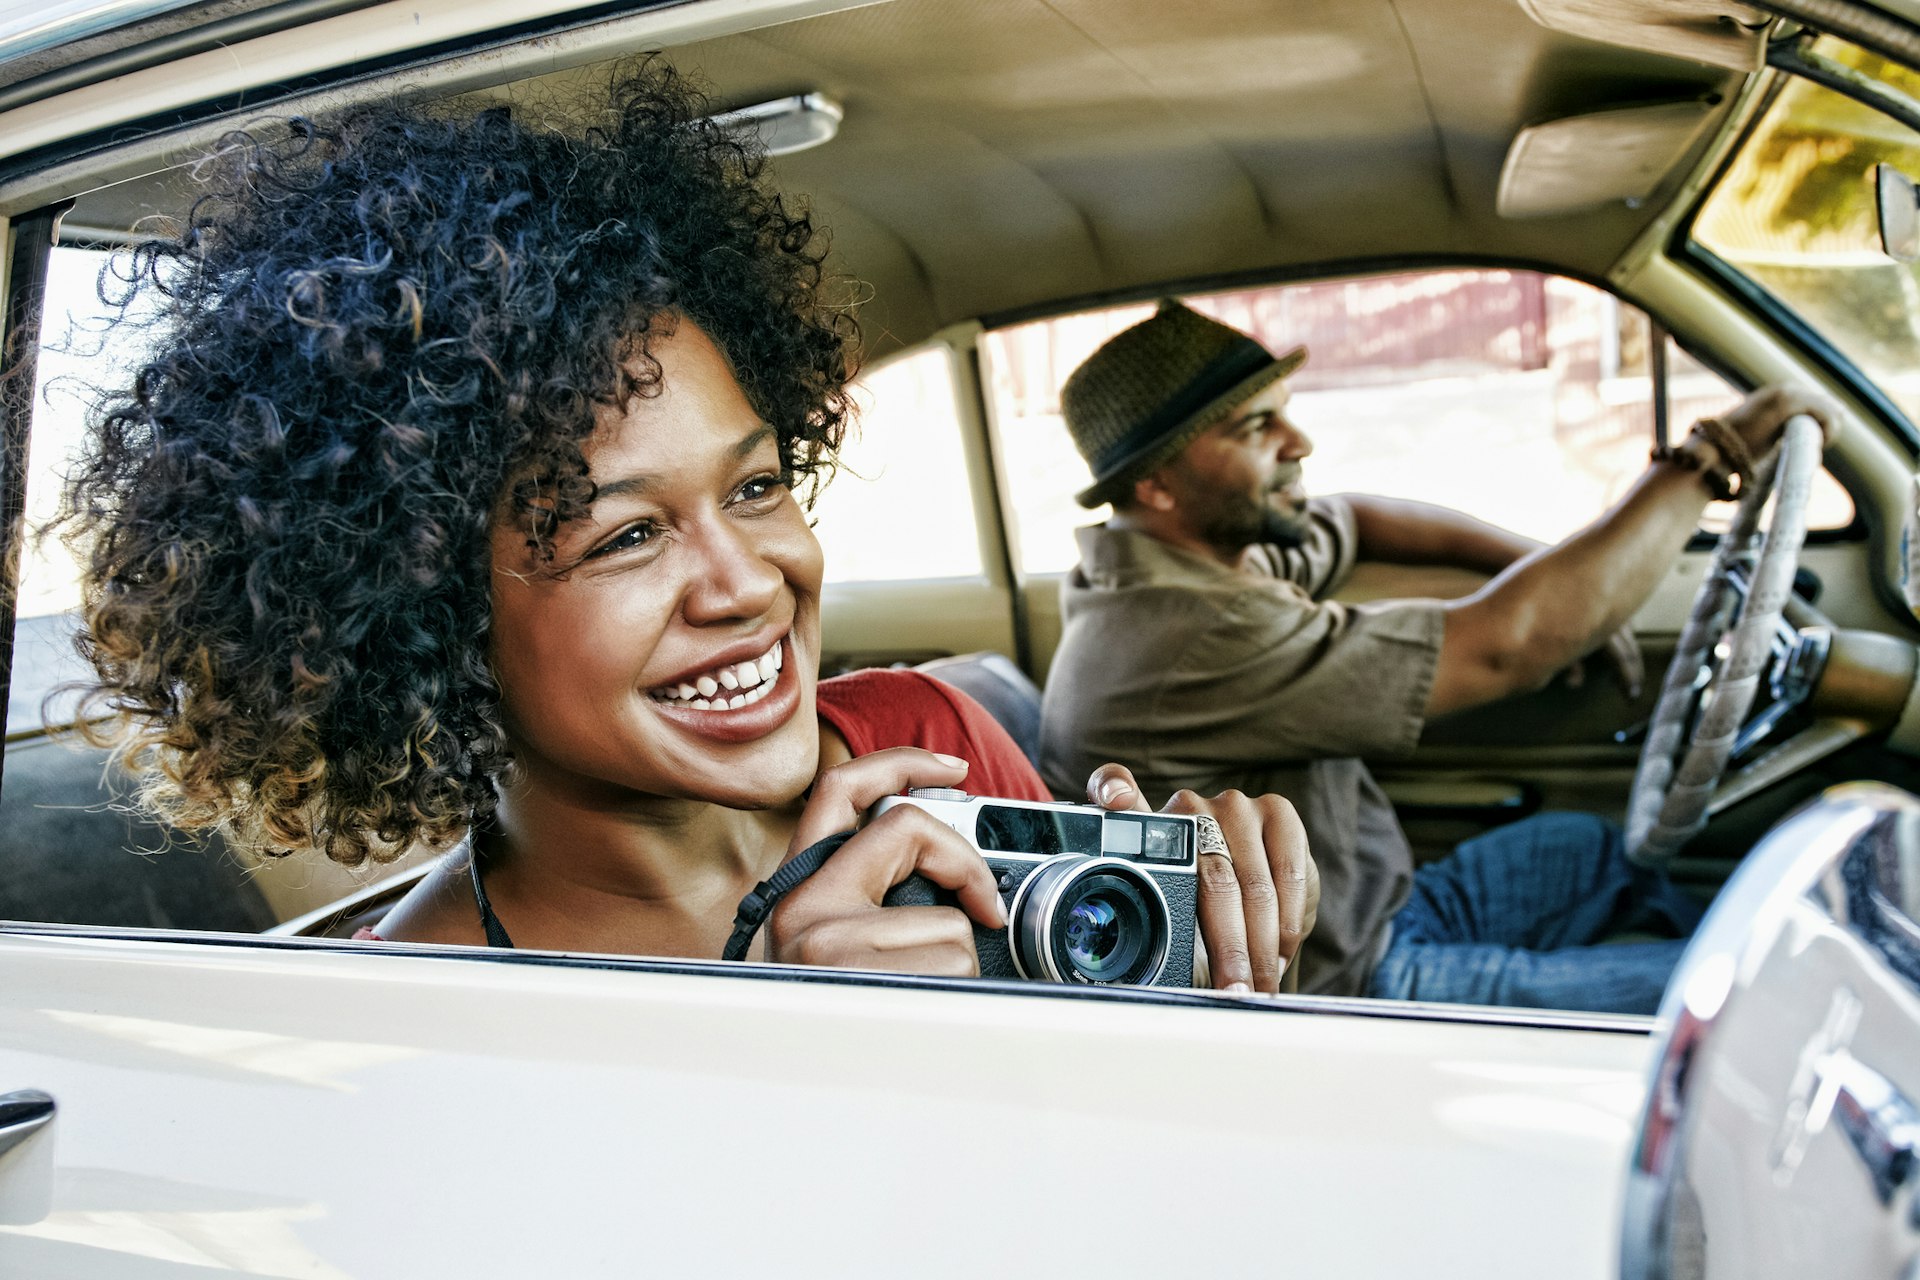 A man and woman with a camera in a car in Los Angeles